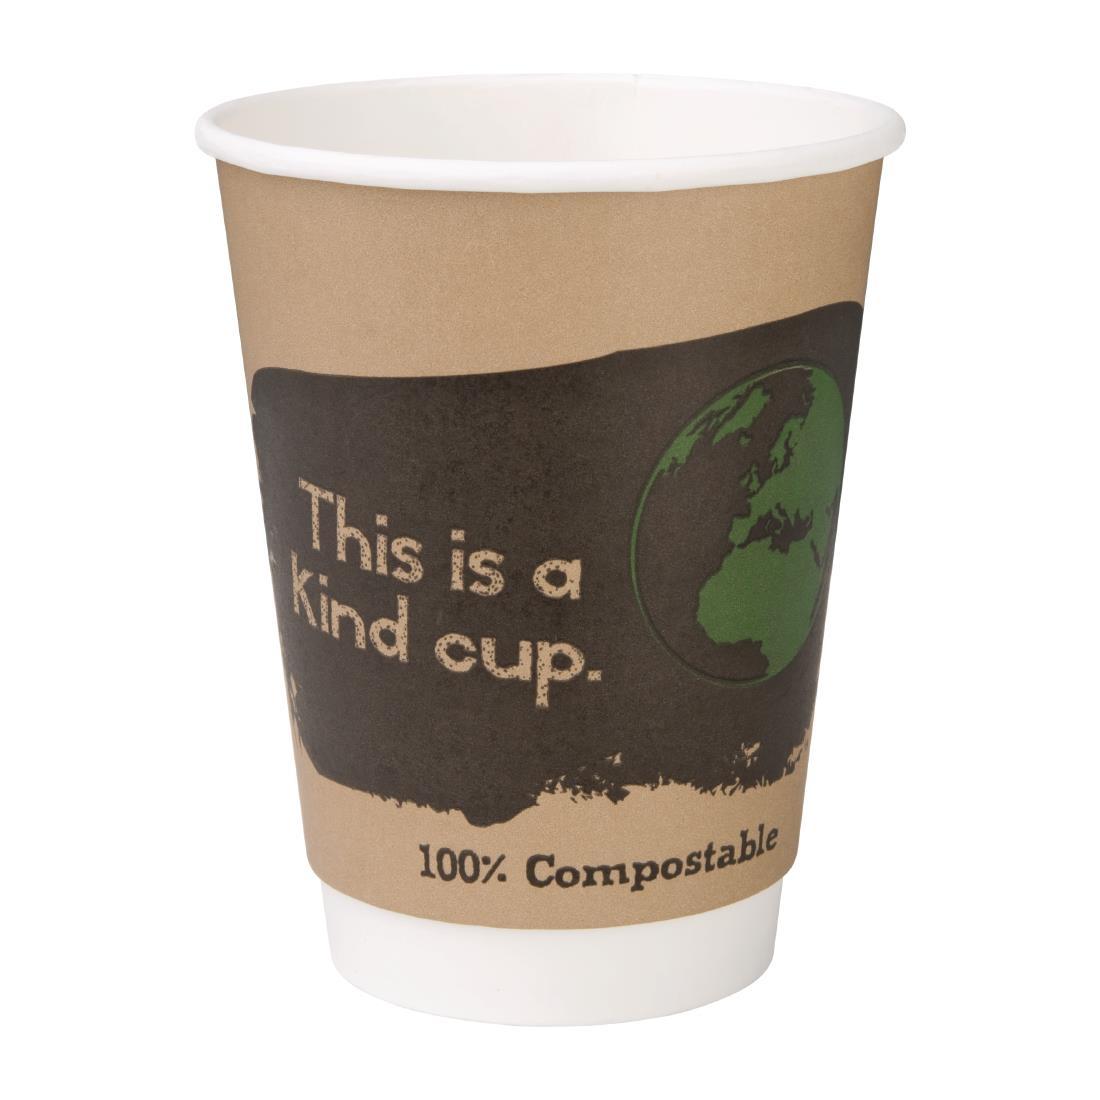 Fiesta Green Compostable Espresso Cups Single Wall 113ml Pack of 1000 4oz